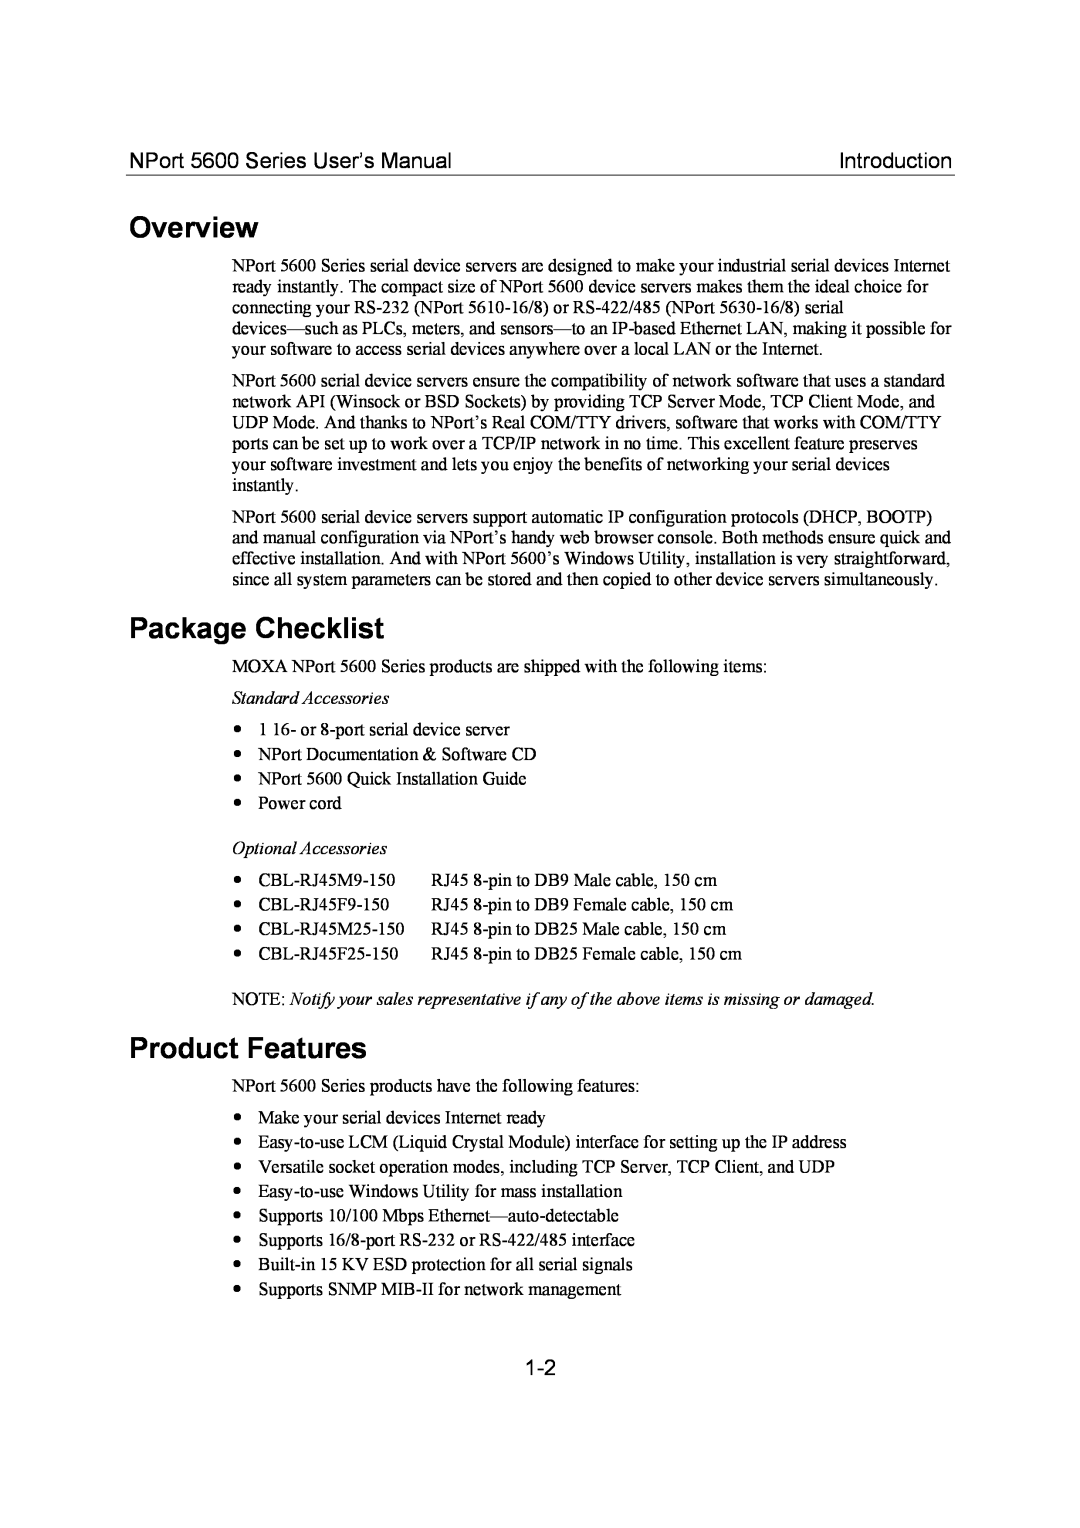 Moxa Technologies Overview, Package Checklist, Product Features, NPort 5600 Series User’s Manual, Introduction 